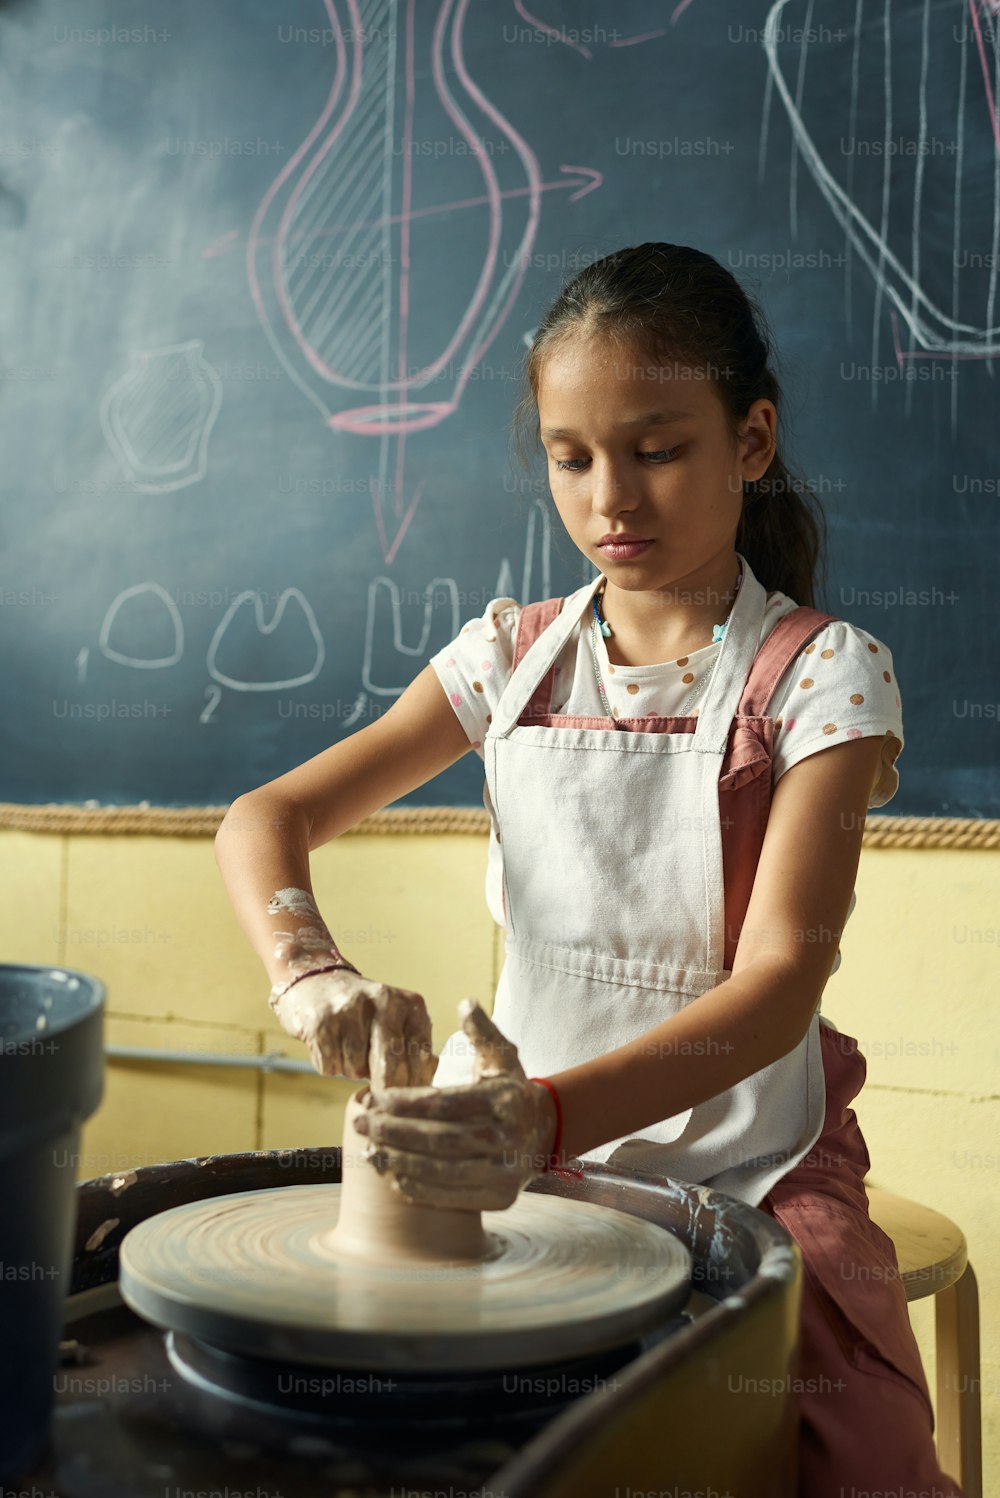 Girl Making a Clay Bowl on Sculpting Wheel Stock Photo - Image of material,  mentoring: 83556142